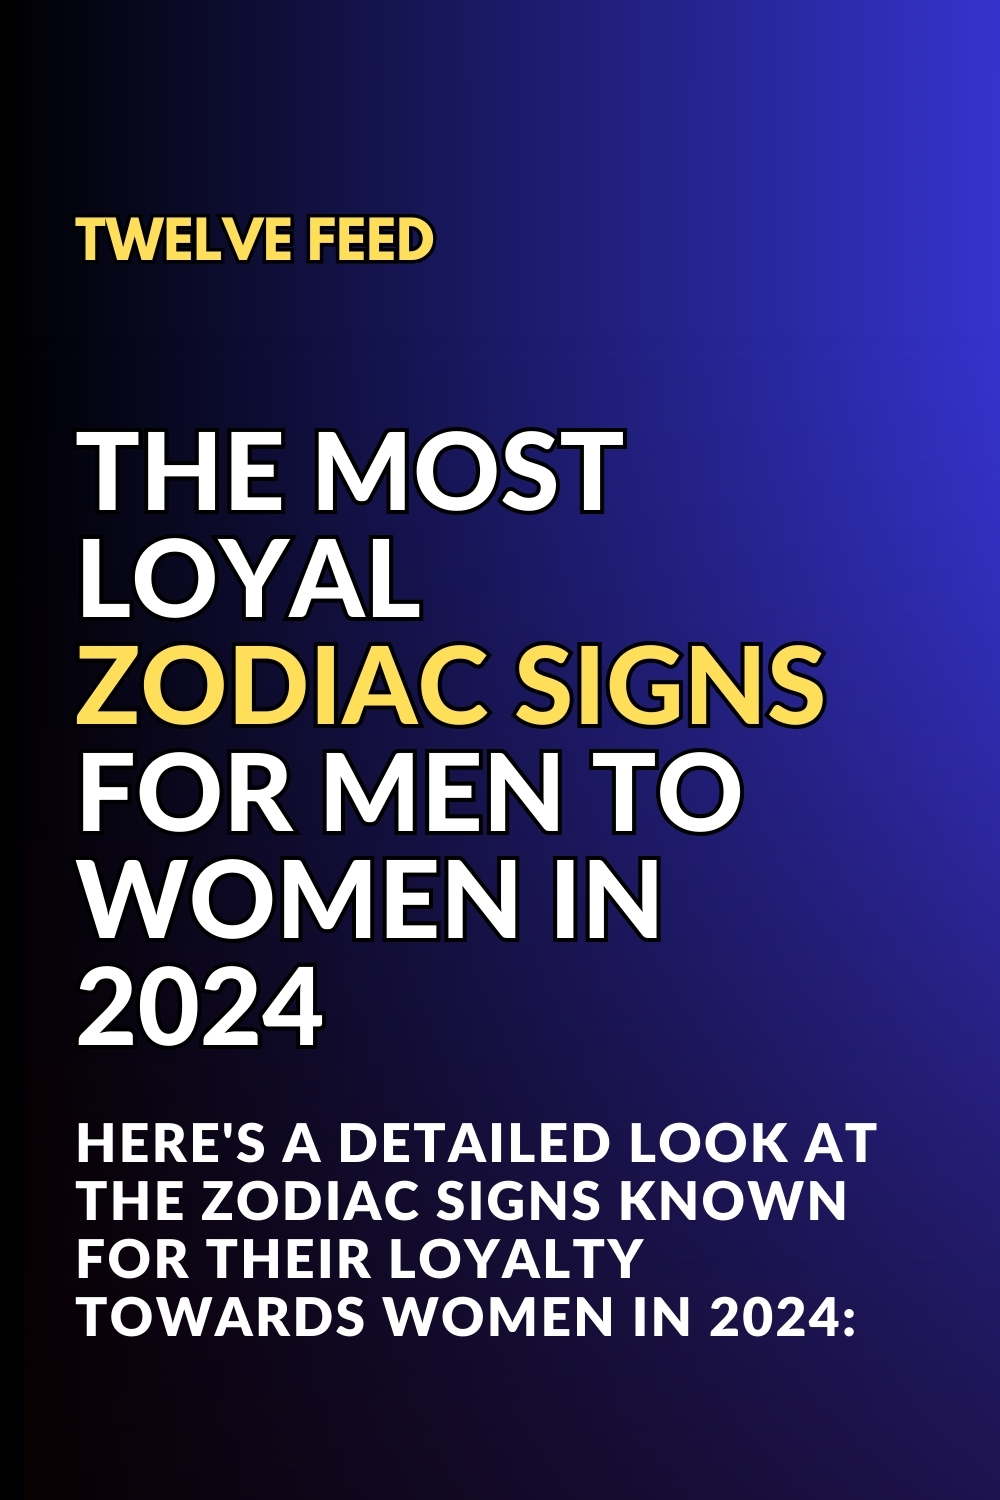 The Most Loyal Zodiac Signs For Men To Women In 2024